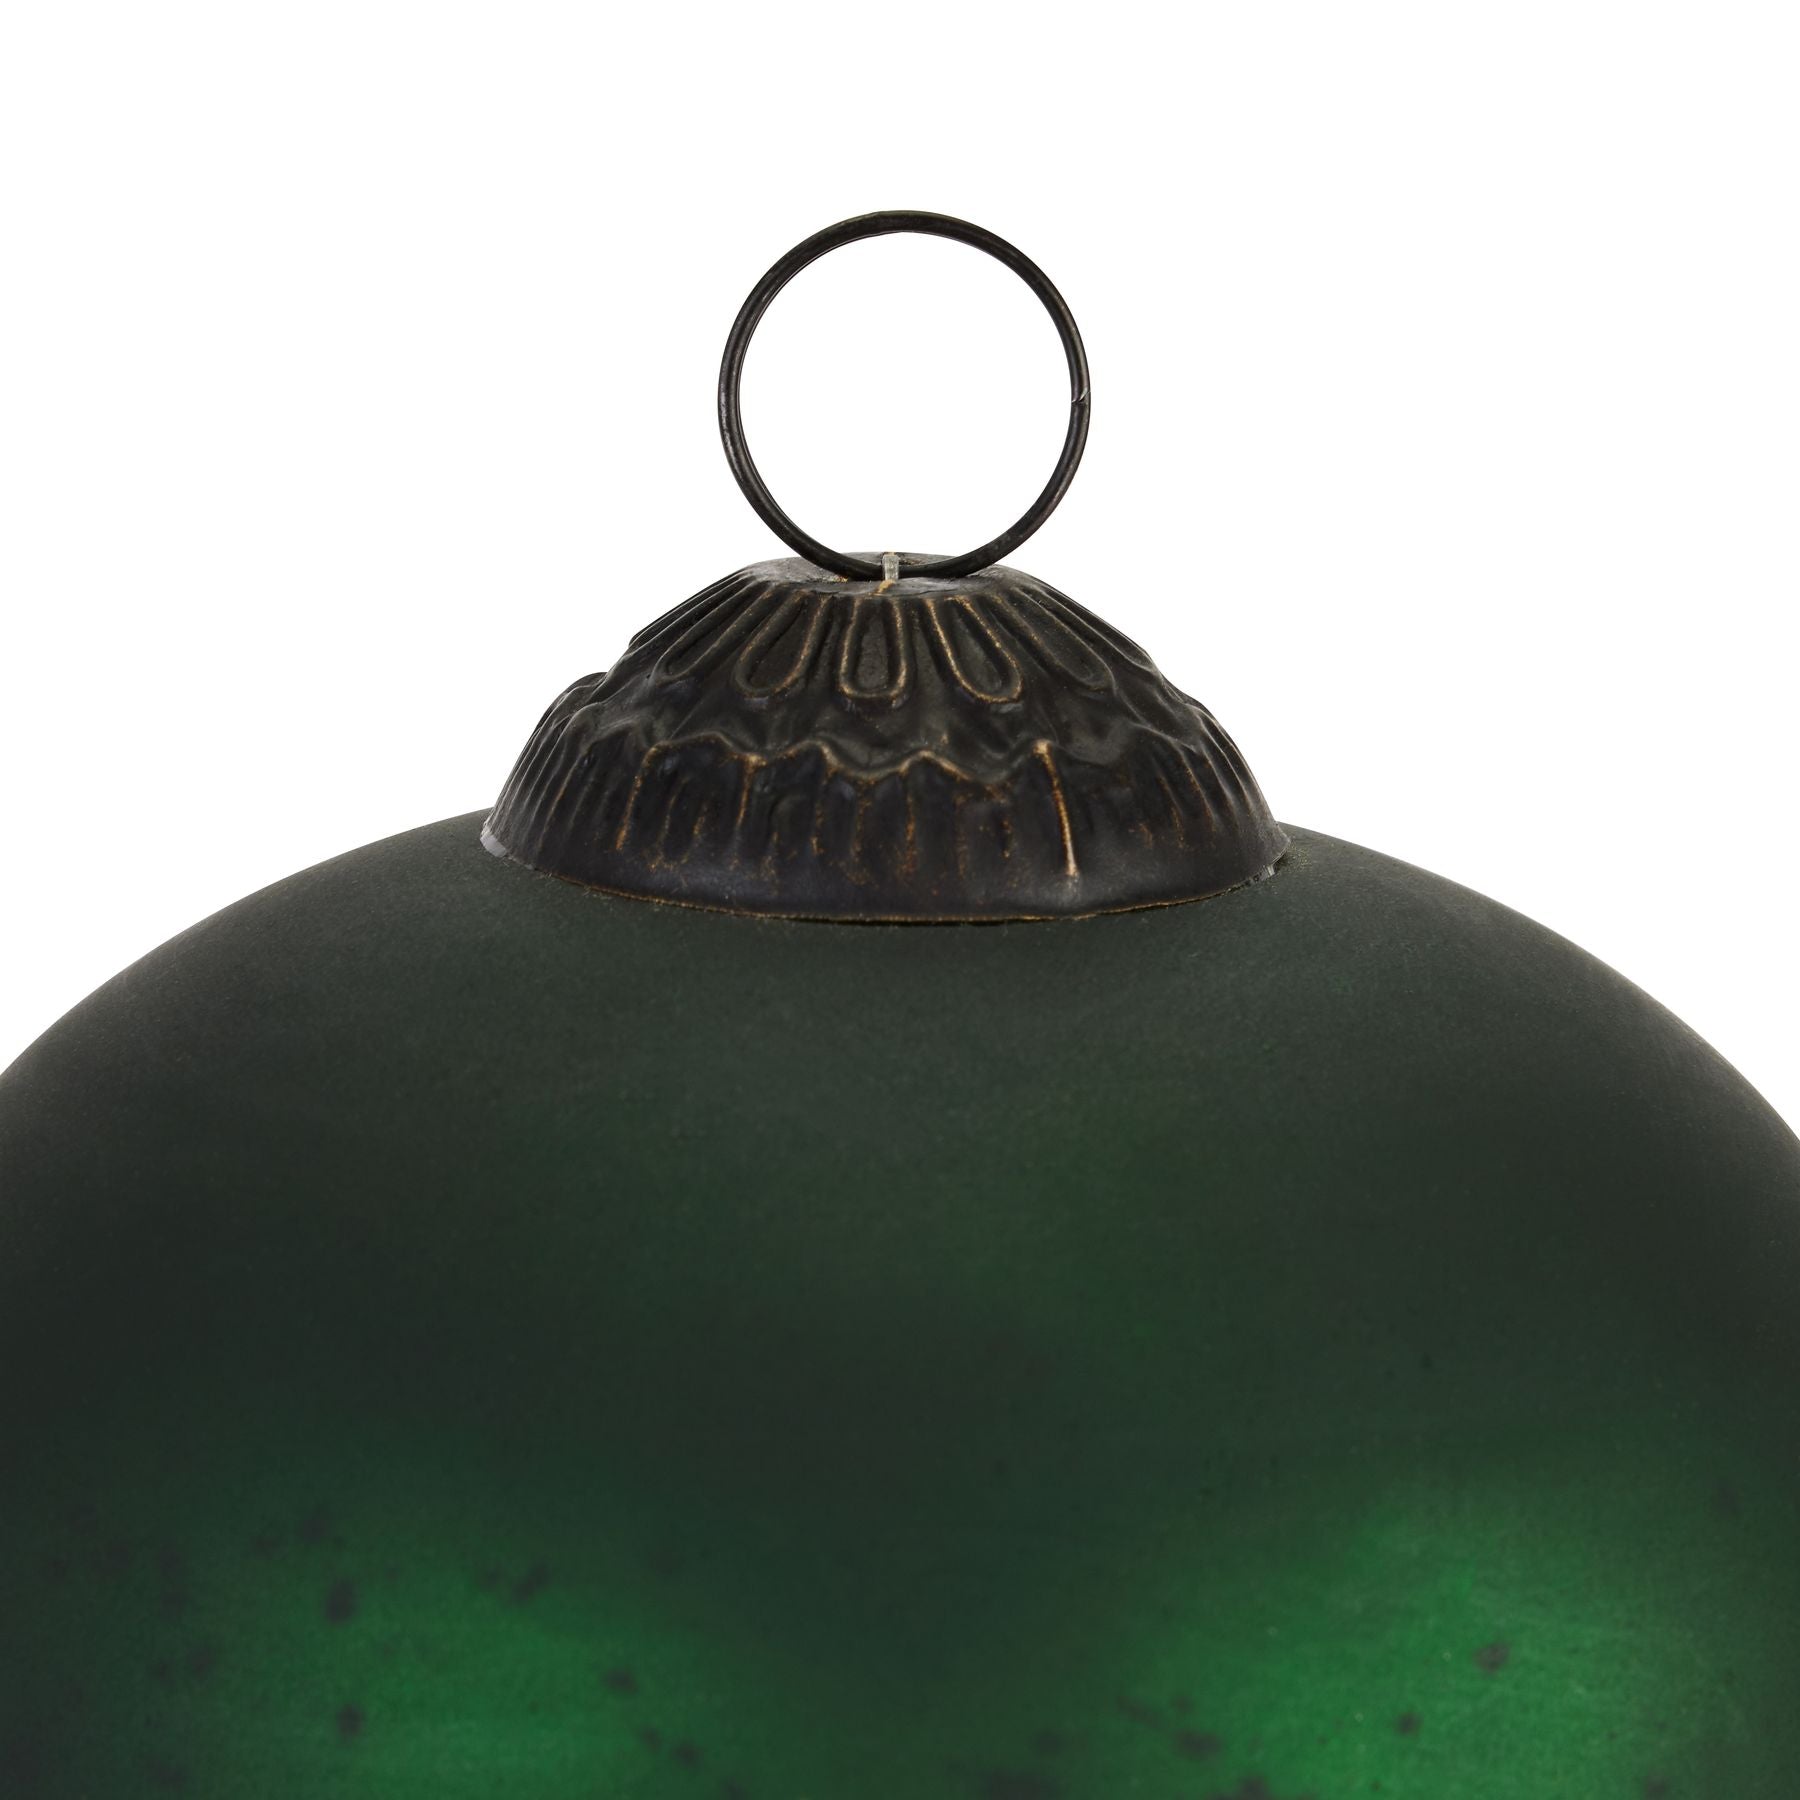 The Noel Collection Forest Green Bulbous Christmas Bauble